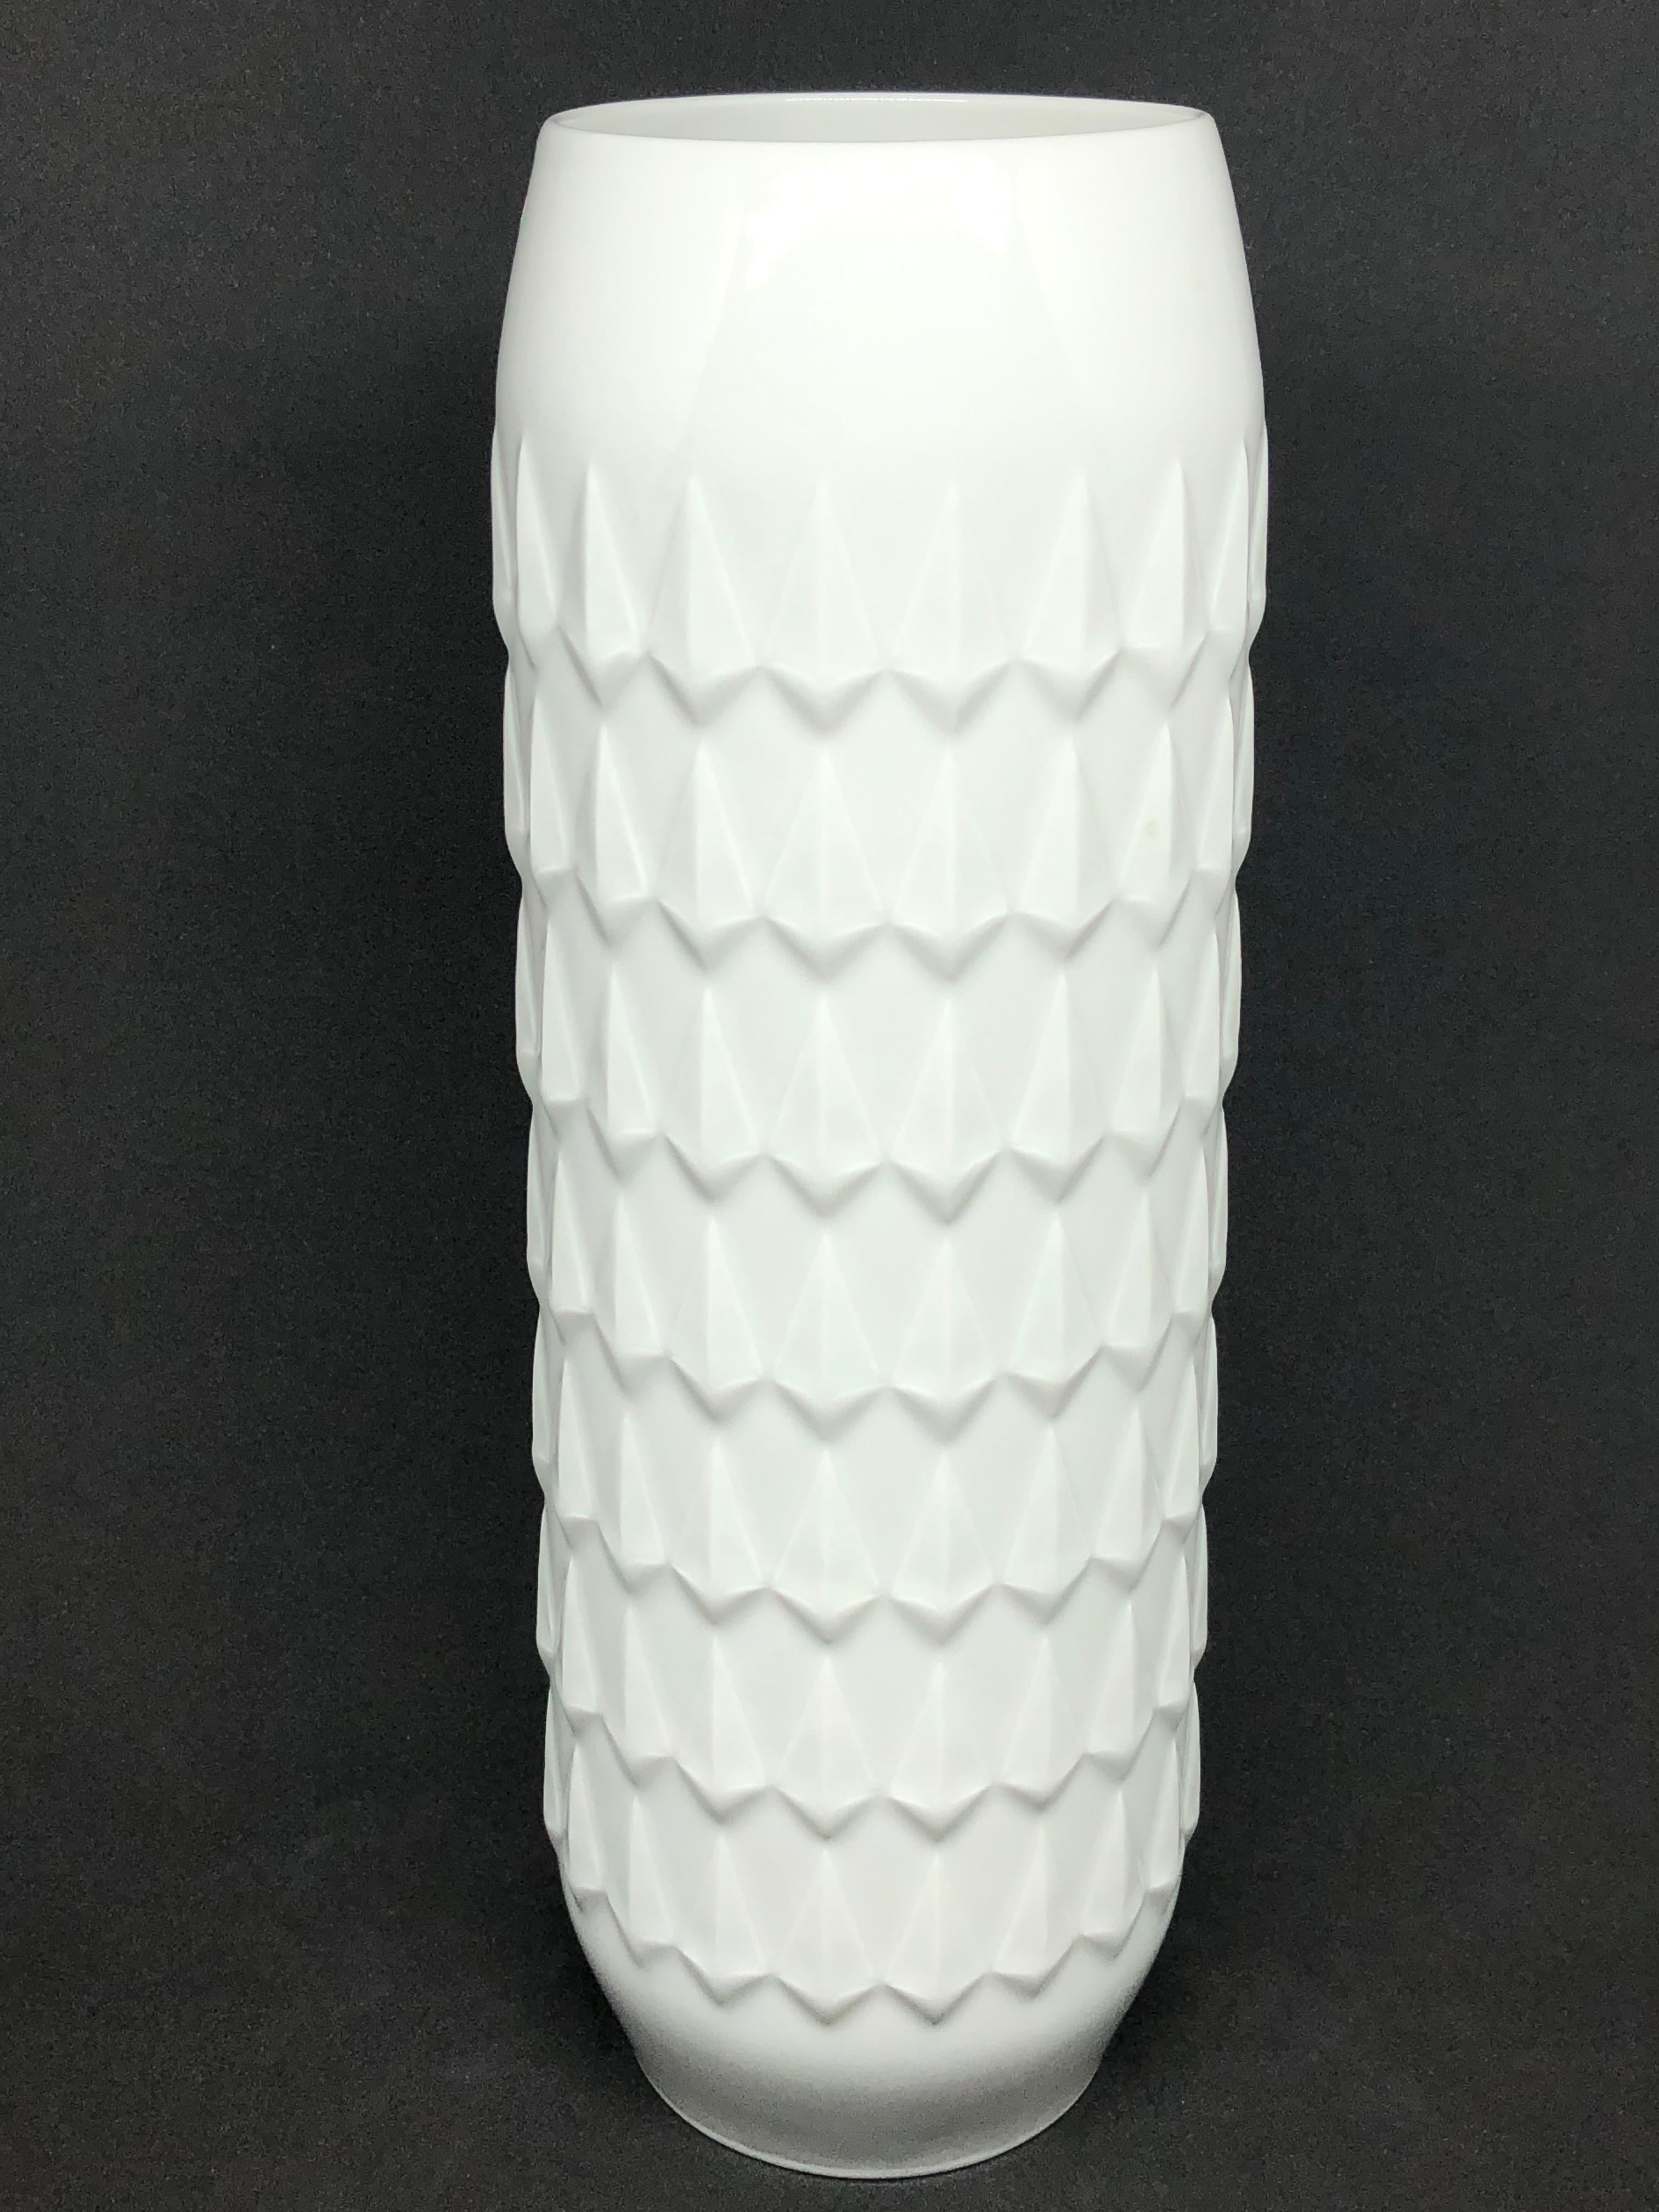 An amazing glazed china porcelain midcentury studio art pottery vase made in Germany, by Cuno Fischer for Hutschenreuther Hohenberg, circa 1960s. Marked. Vase is in very good condition with no chips, cracks, or flea bites.